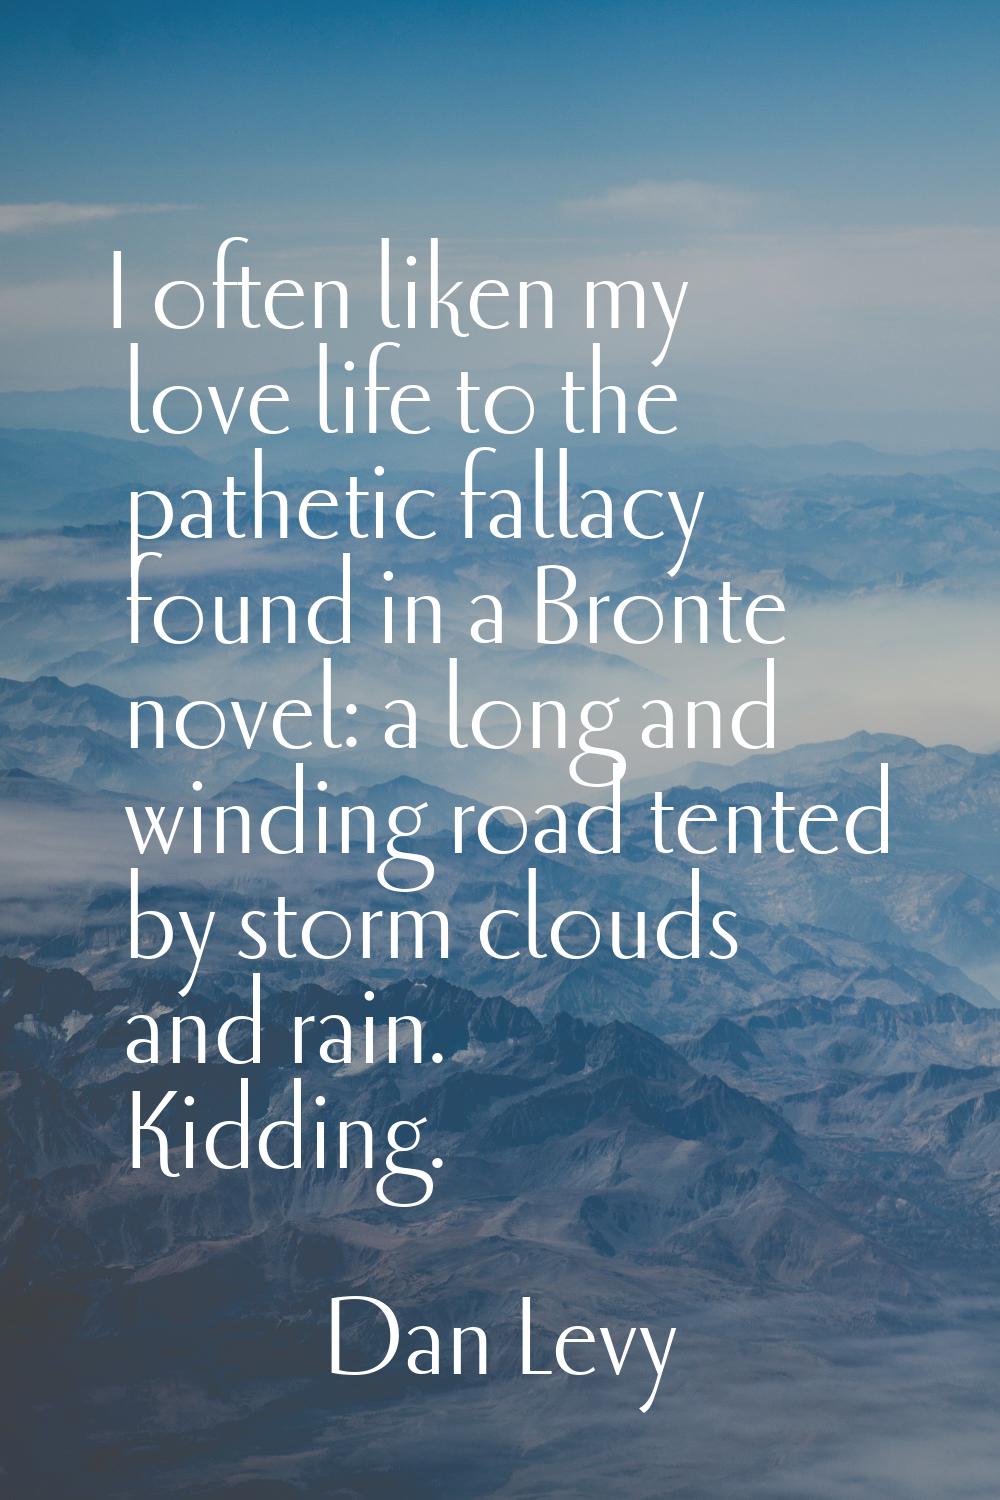 I often liken my love life to the pathetic fallacy found in a Bronte novel: a long and winding road